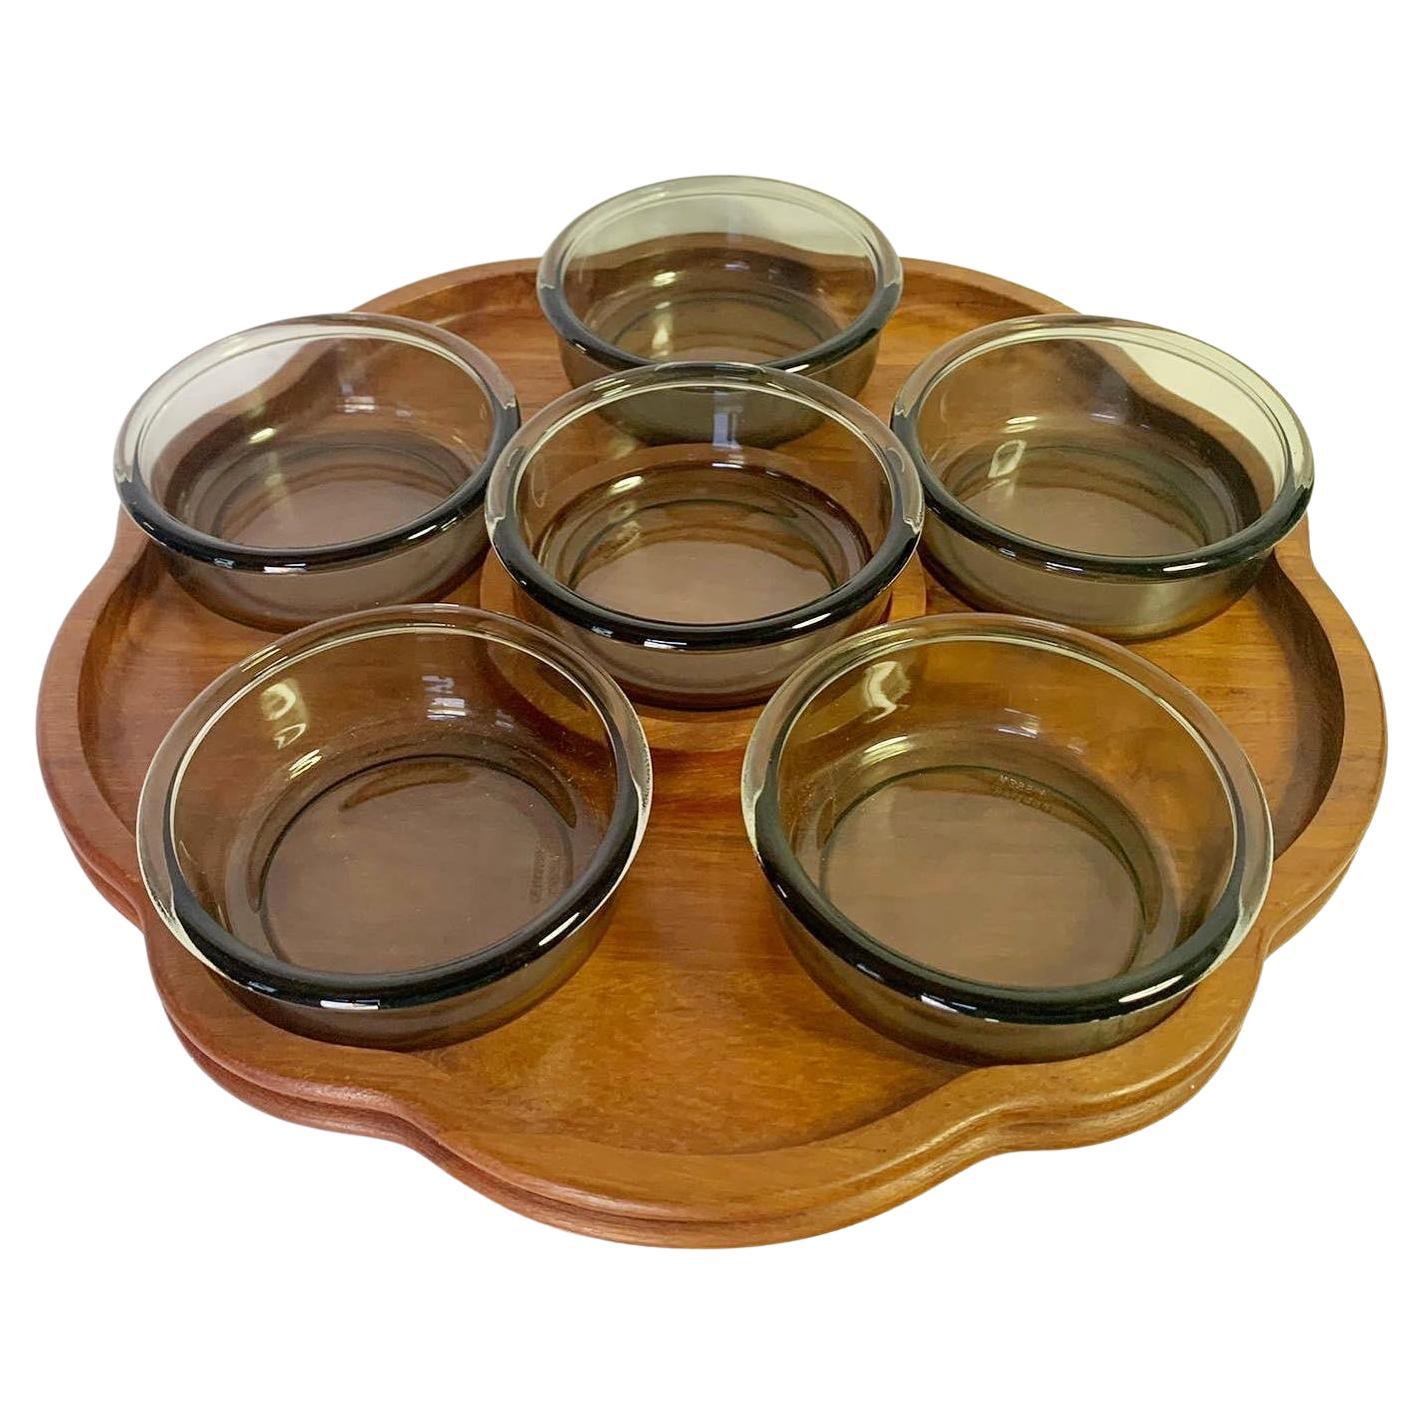 Modernist Quistgaard Denmark Teak Lazy Susan With 9 Matching Smoked Glass Bowls For Sale